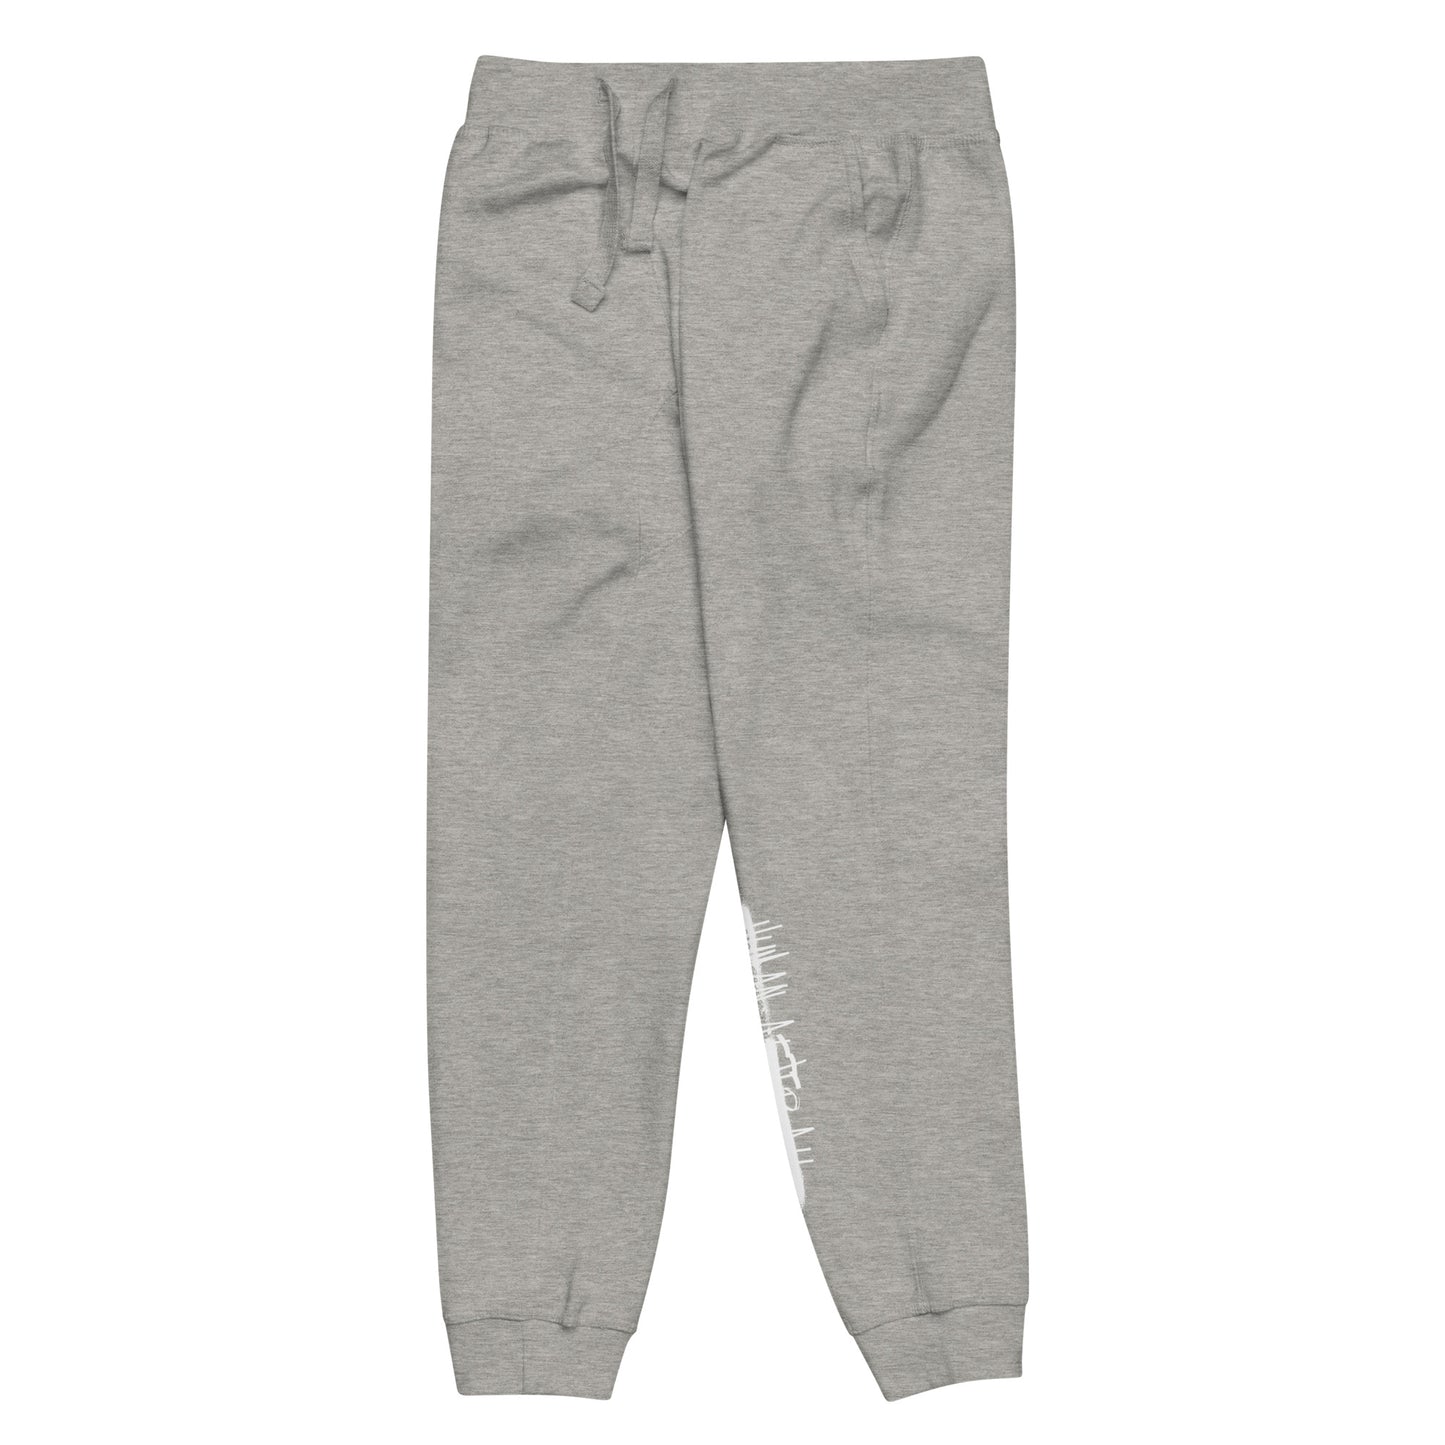 Human After All sweatpants